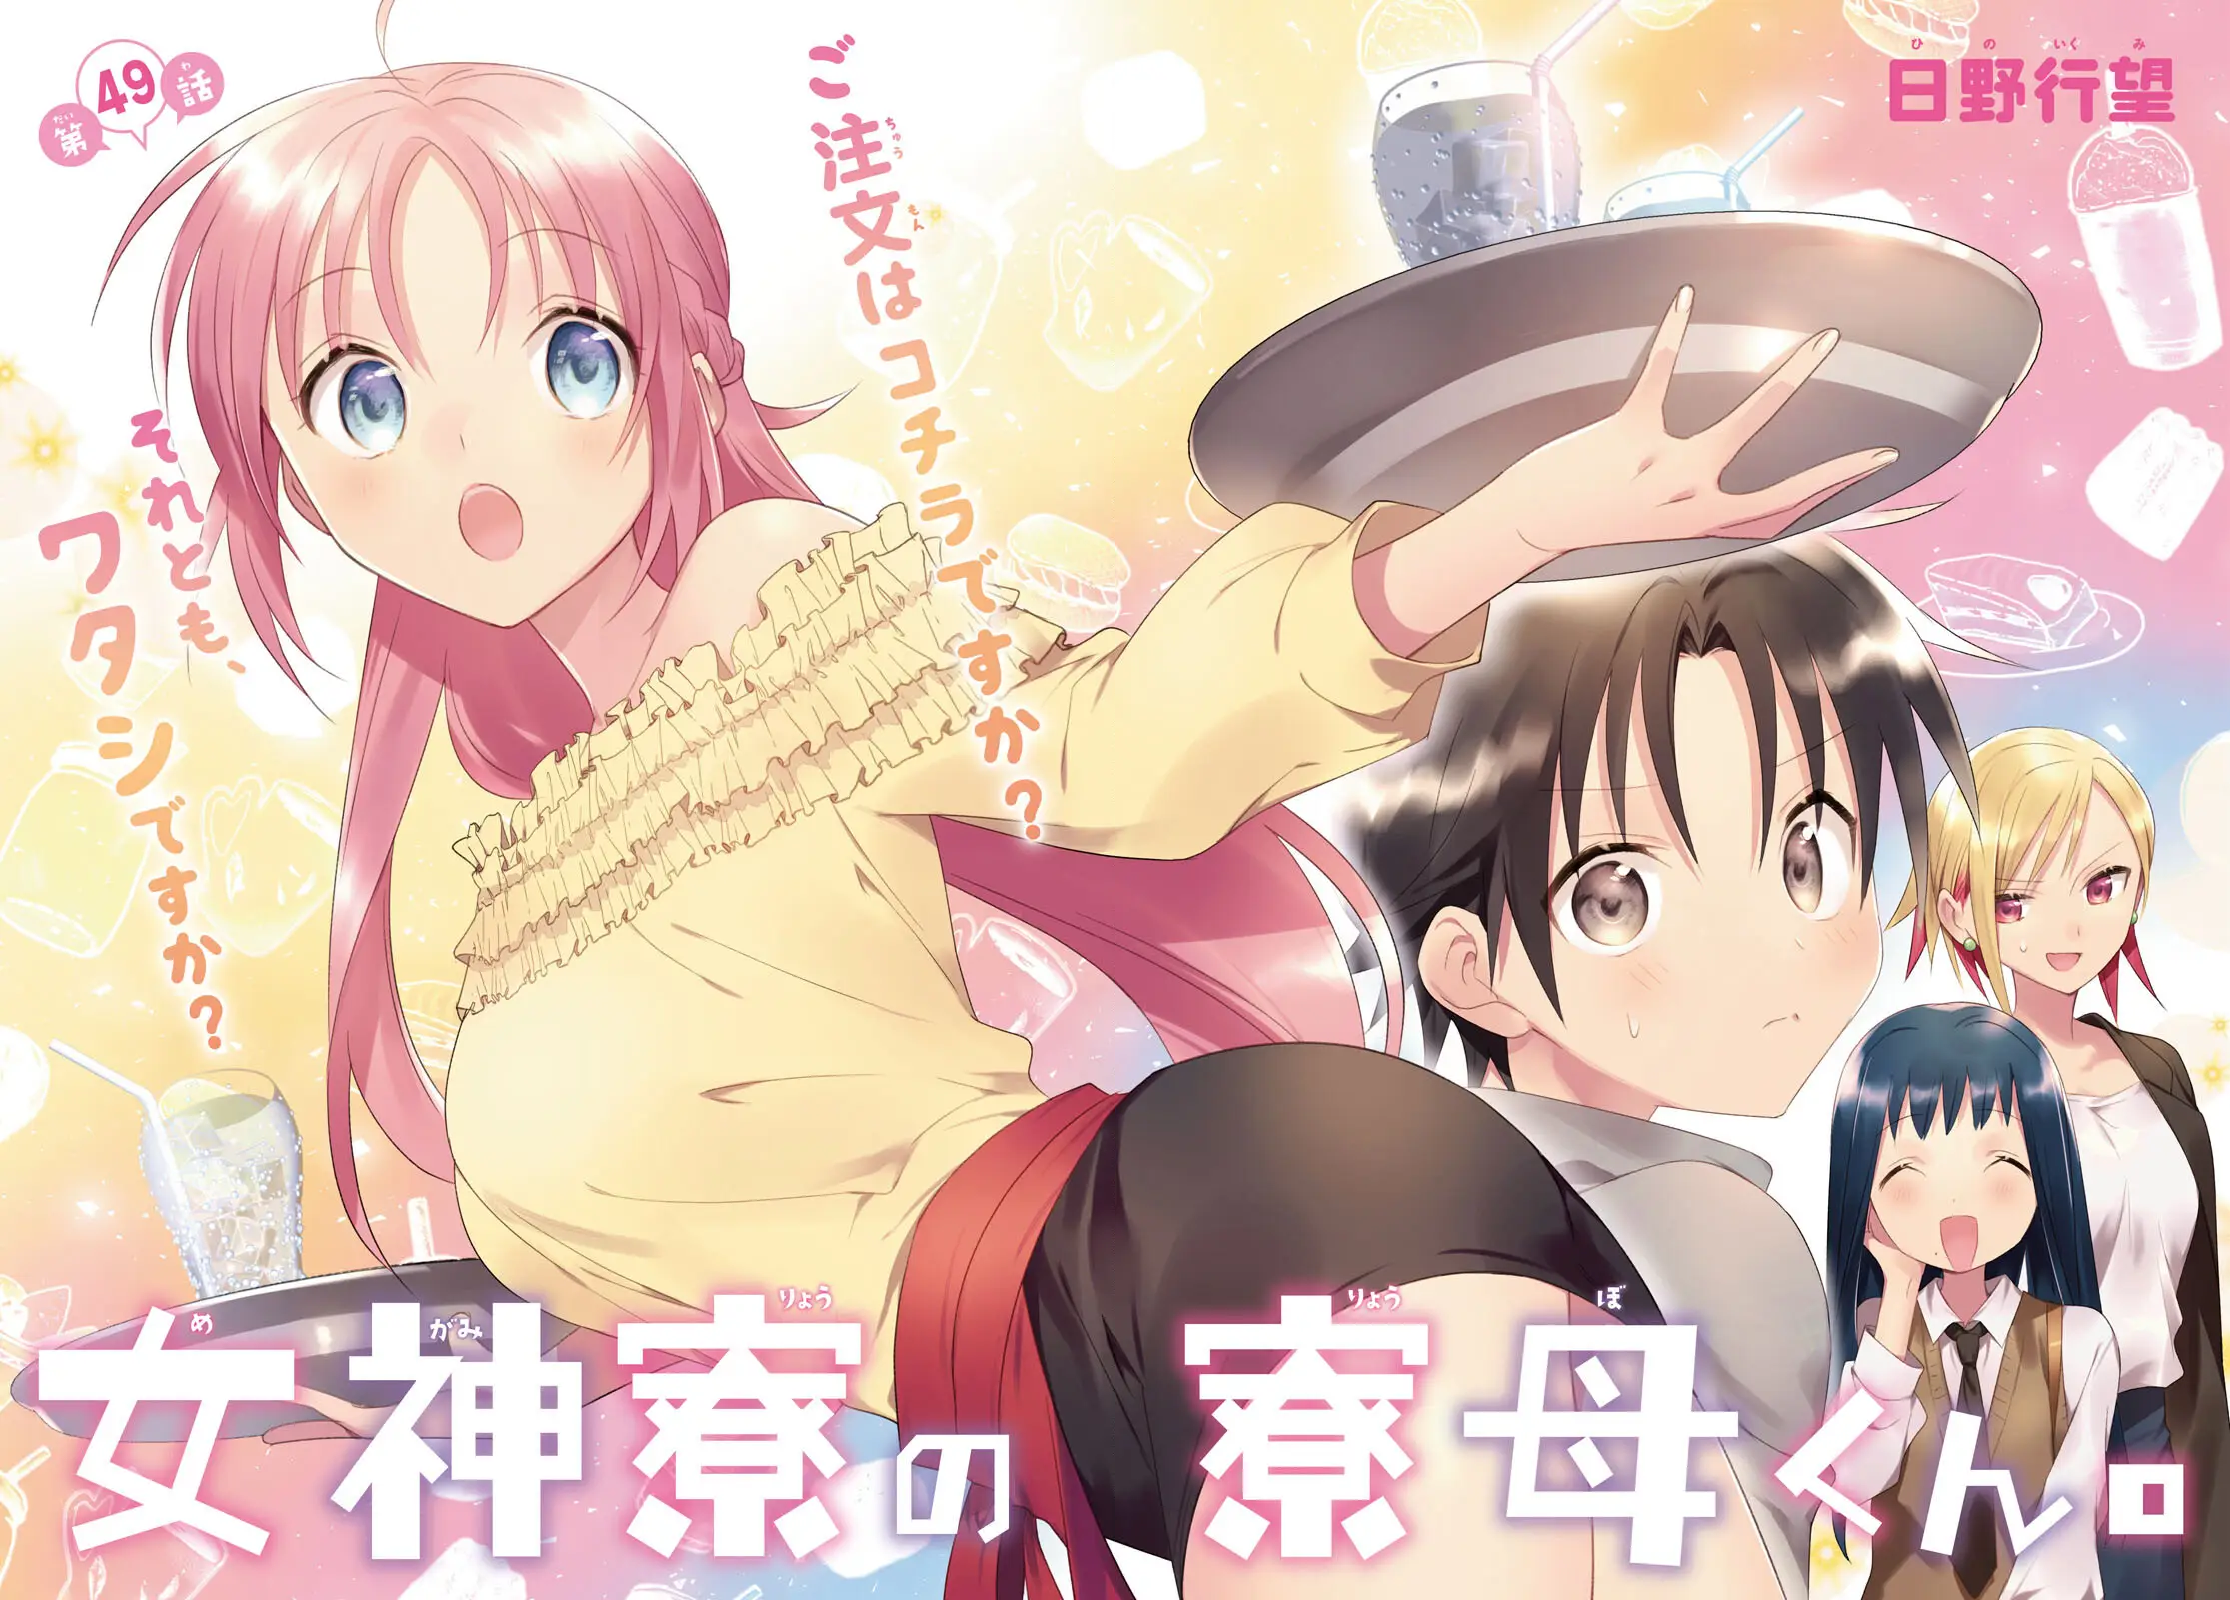 Megami-ryou no Ryoubo-kun. Chapter 49 Discussion - Forums 